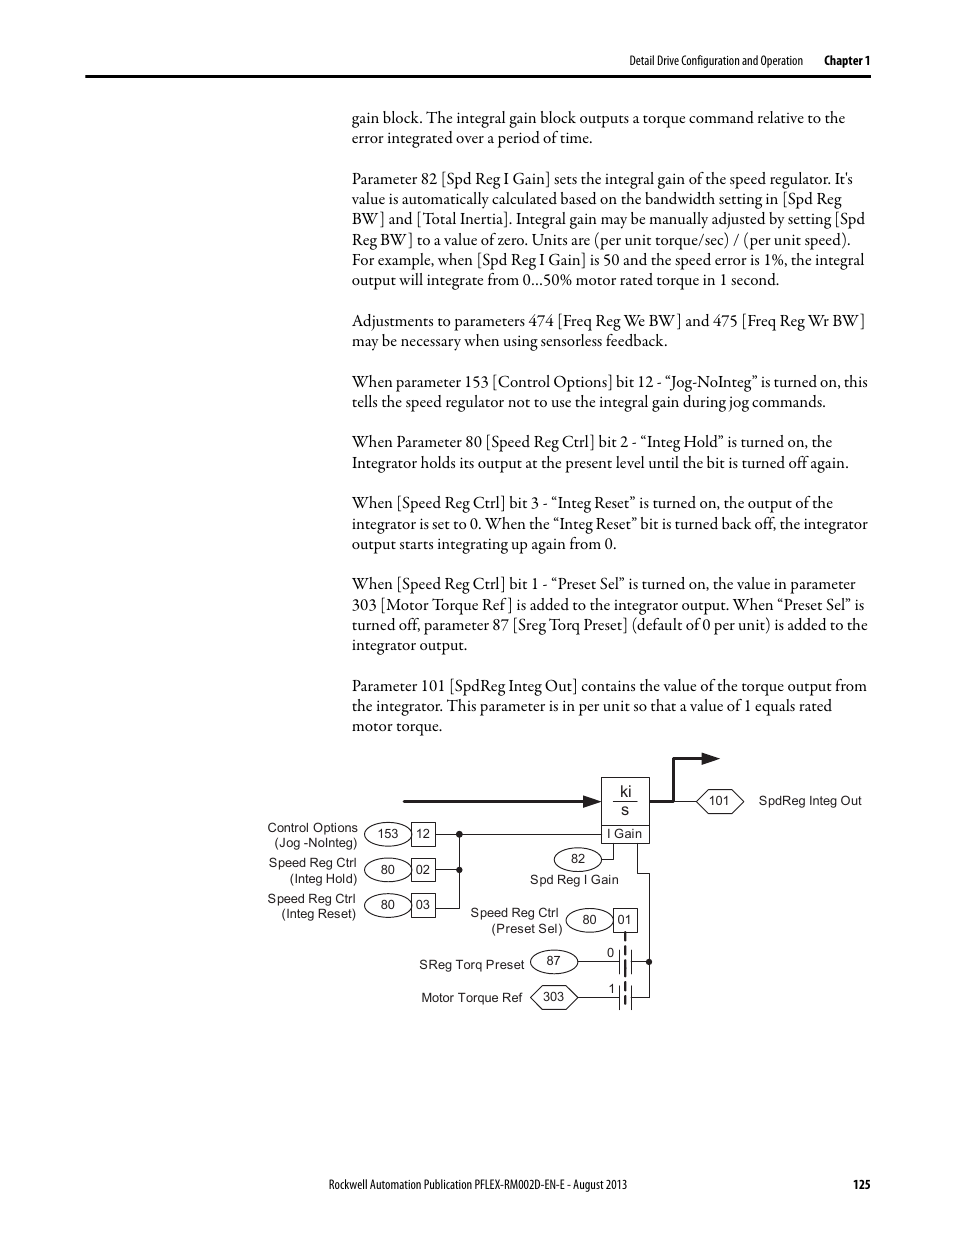 Rockwell Automation 20D PowerFlex 700S with Phase I Control Reference Manual User Manual | Page 125 / 190